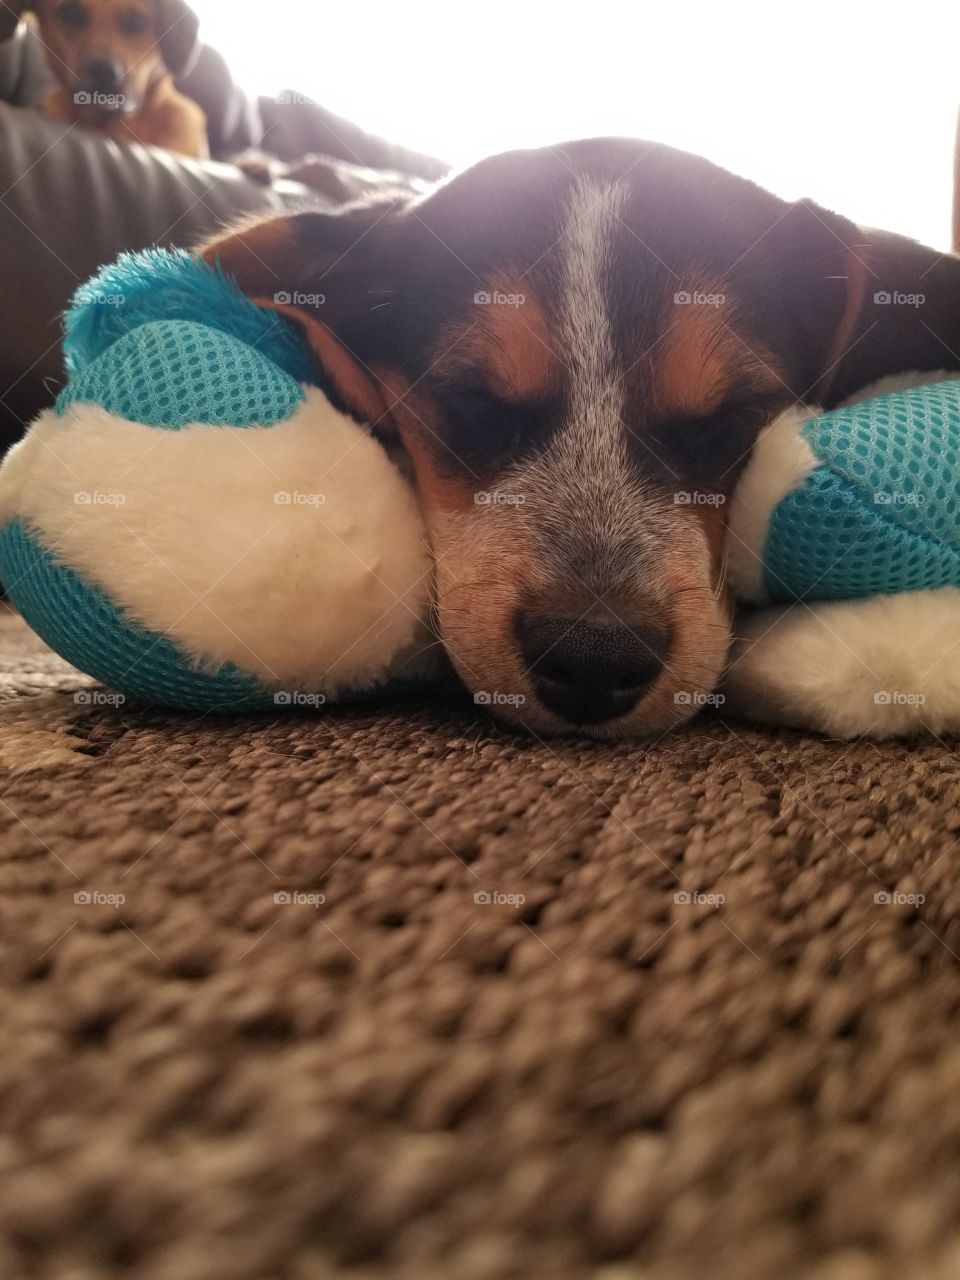 Playing with toys is such hard work!